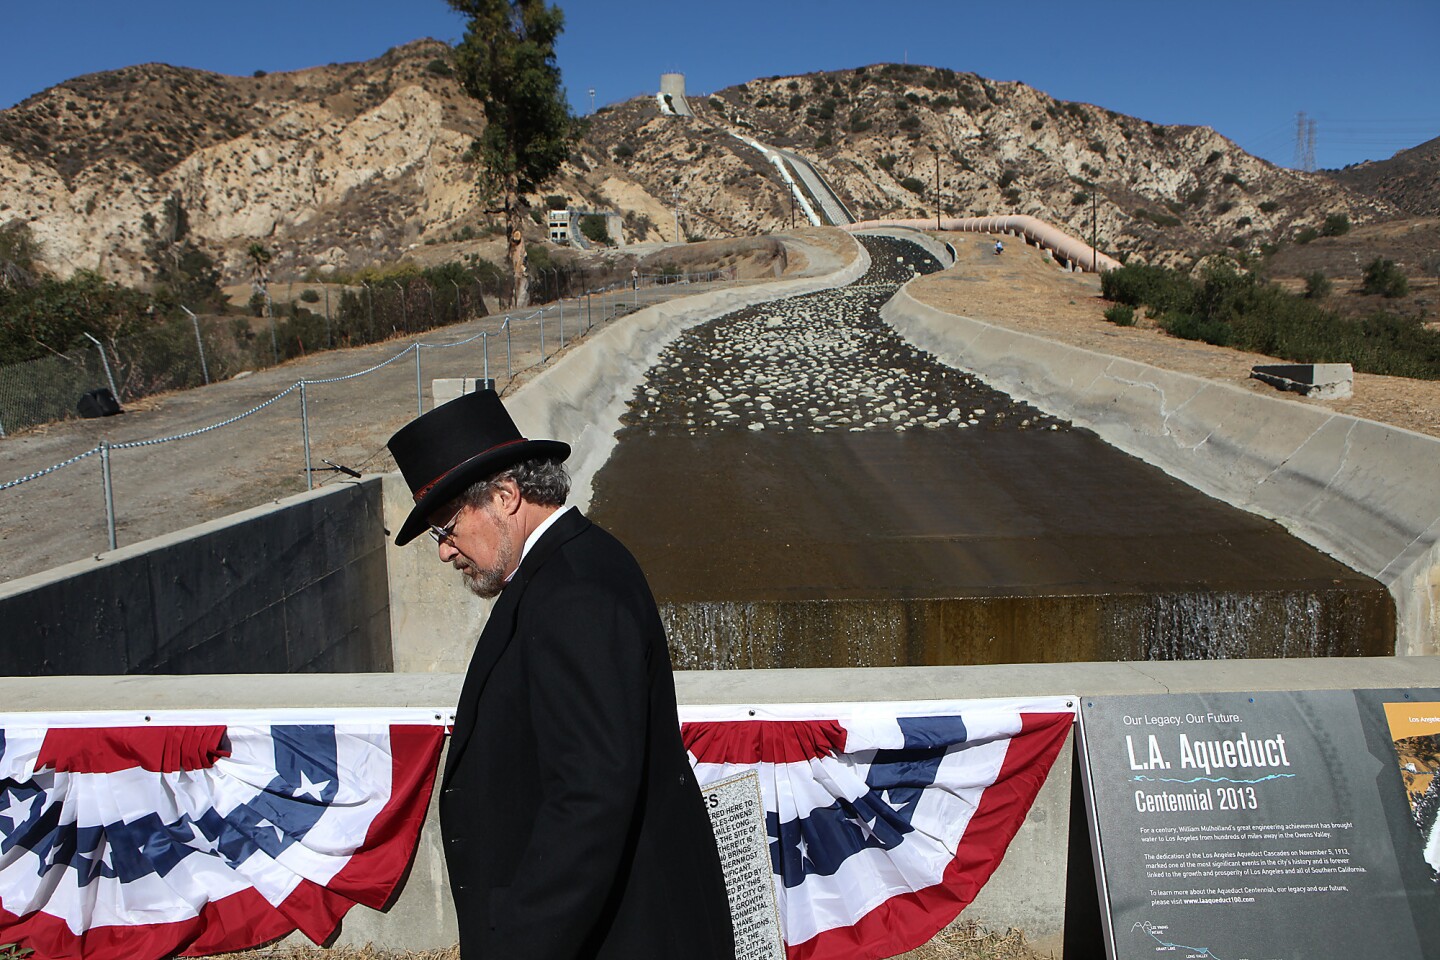 Douglas Larner, a member of E Clampus Vitus, a group dedicated to preserving the history of the American West, awaits the reenactment of the opening of the Los Angeles Aqueduct.